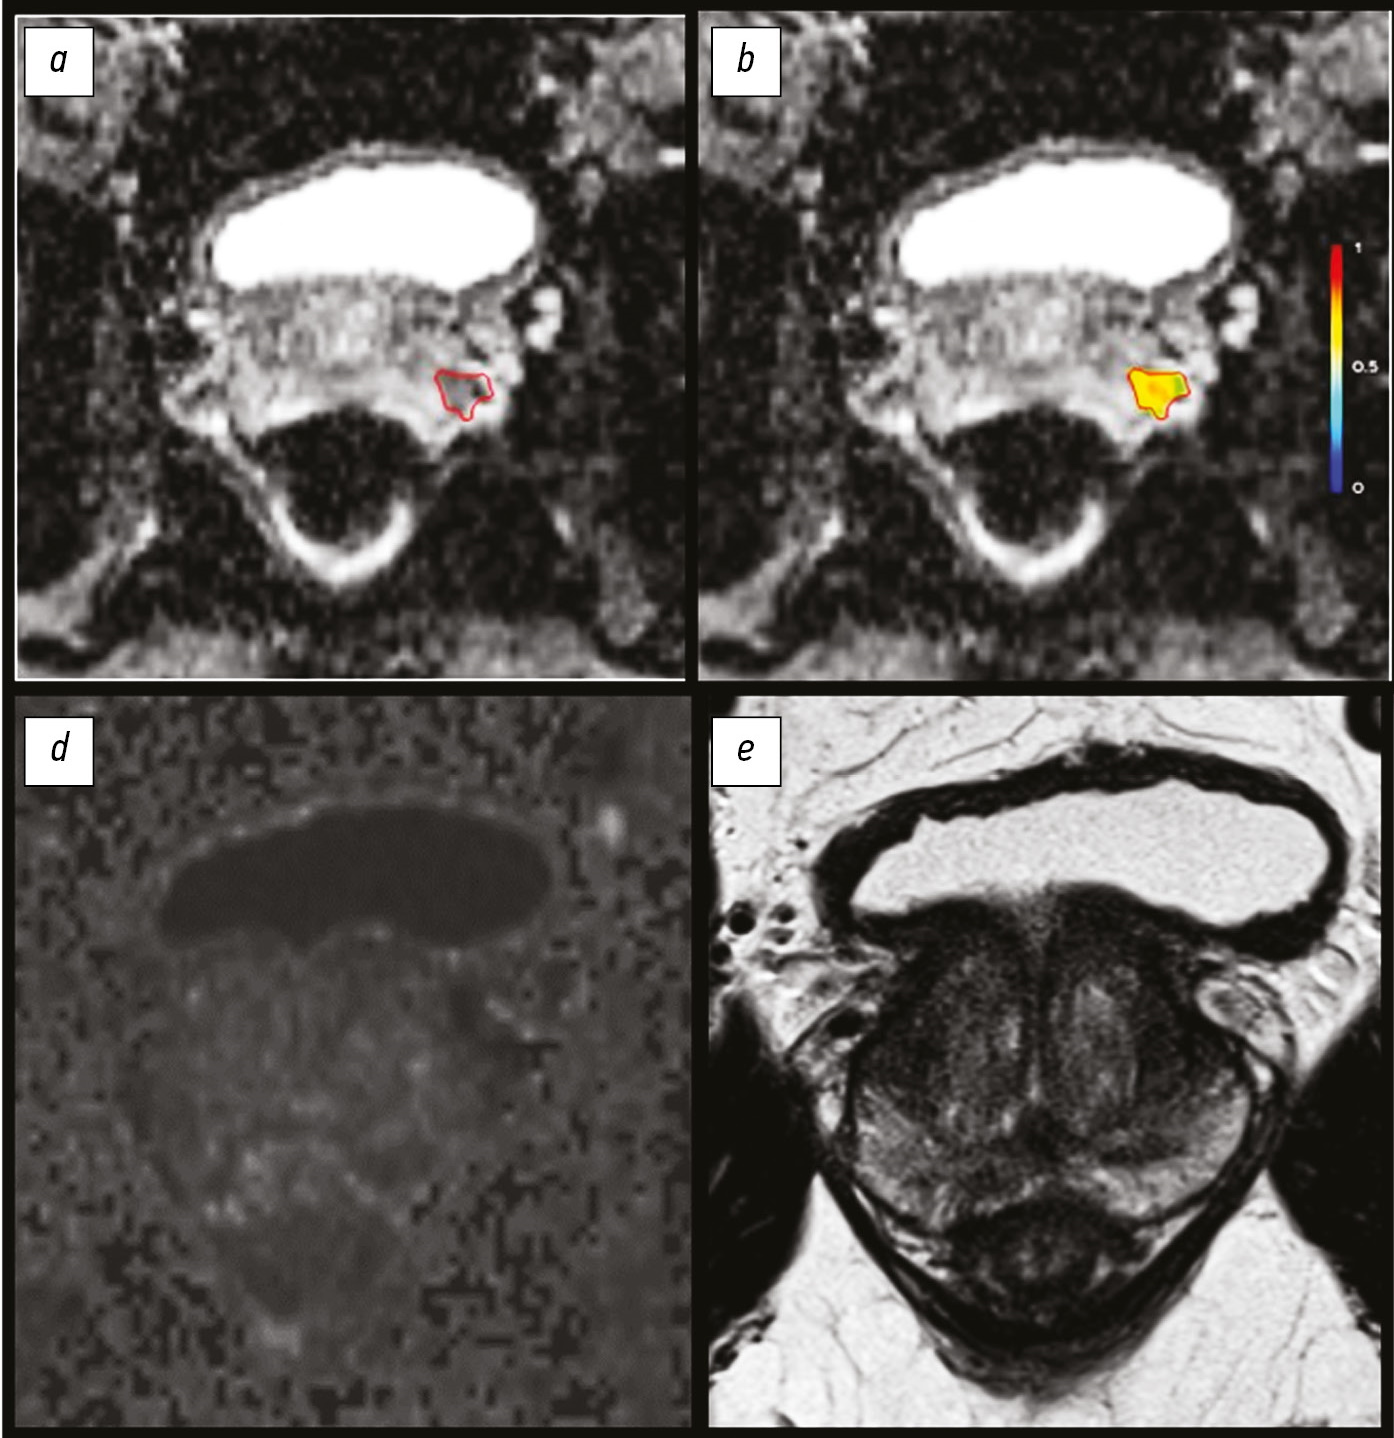 Magnetic resonance imaging radiomics in prostate cancer radiology: what is currently known?